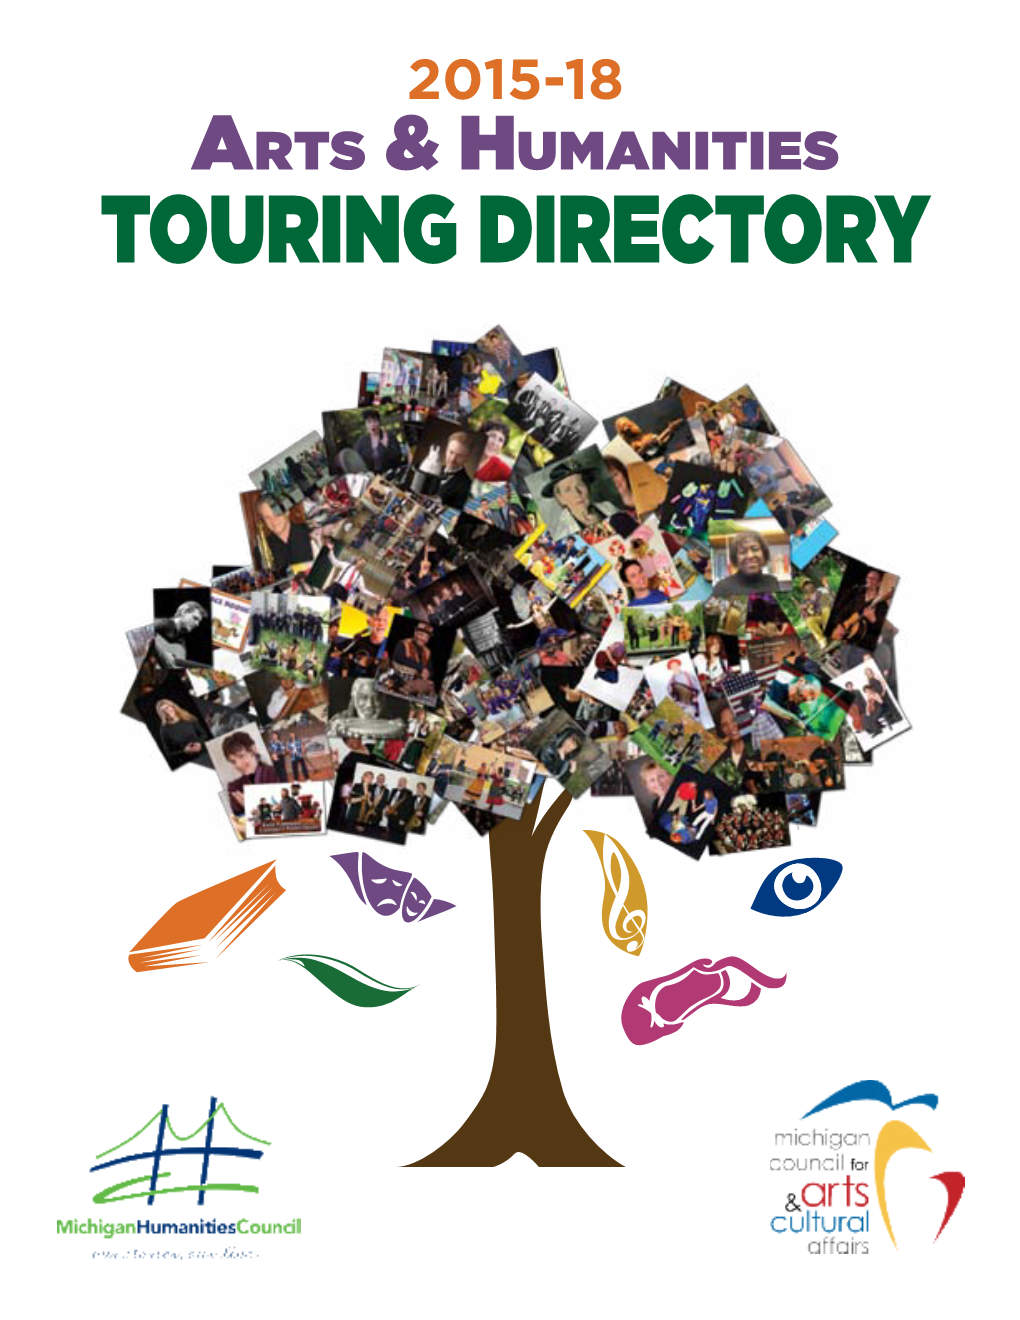 Arts & Humanities Touring Directory